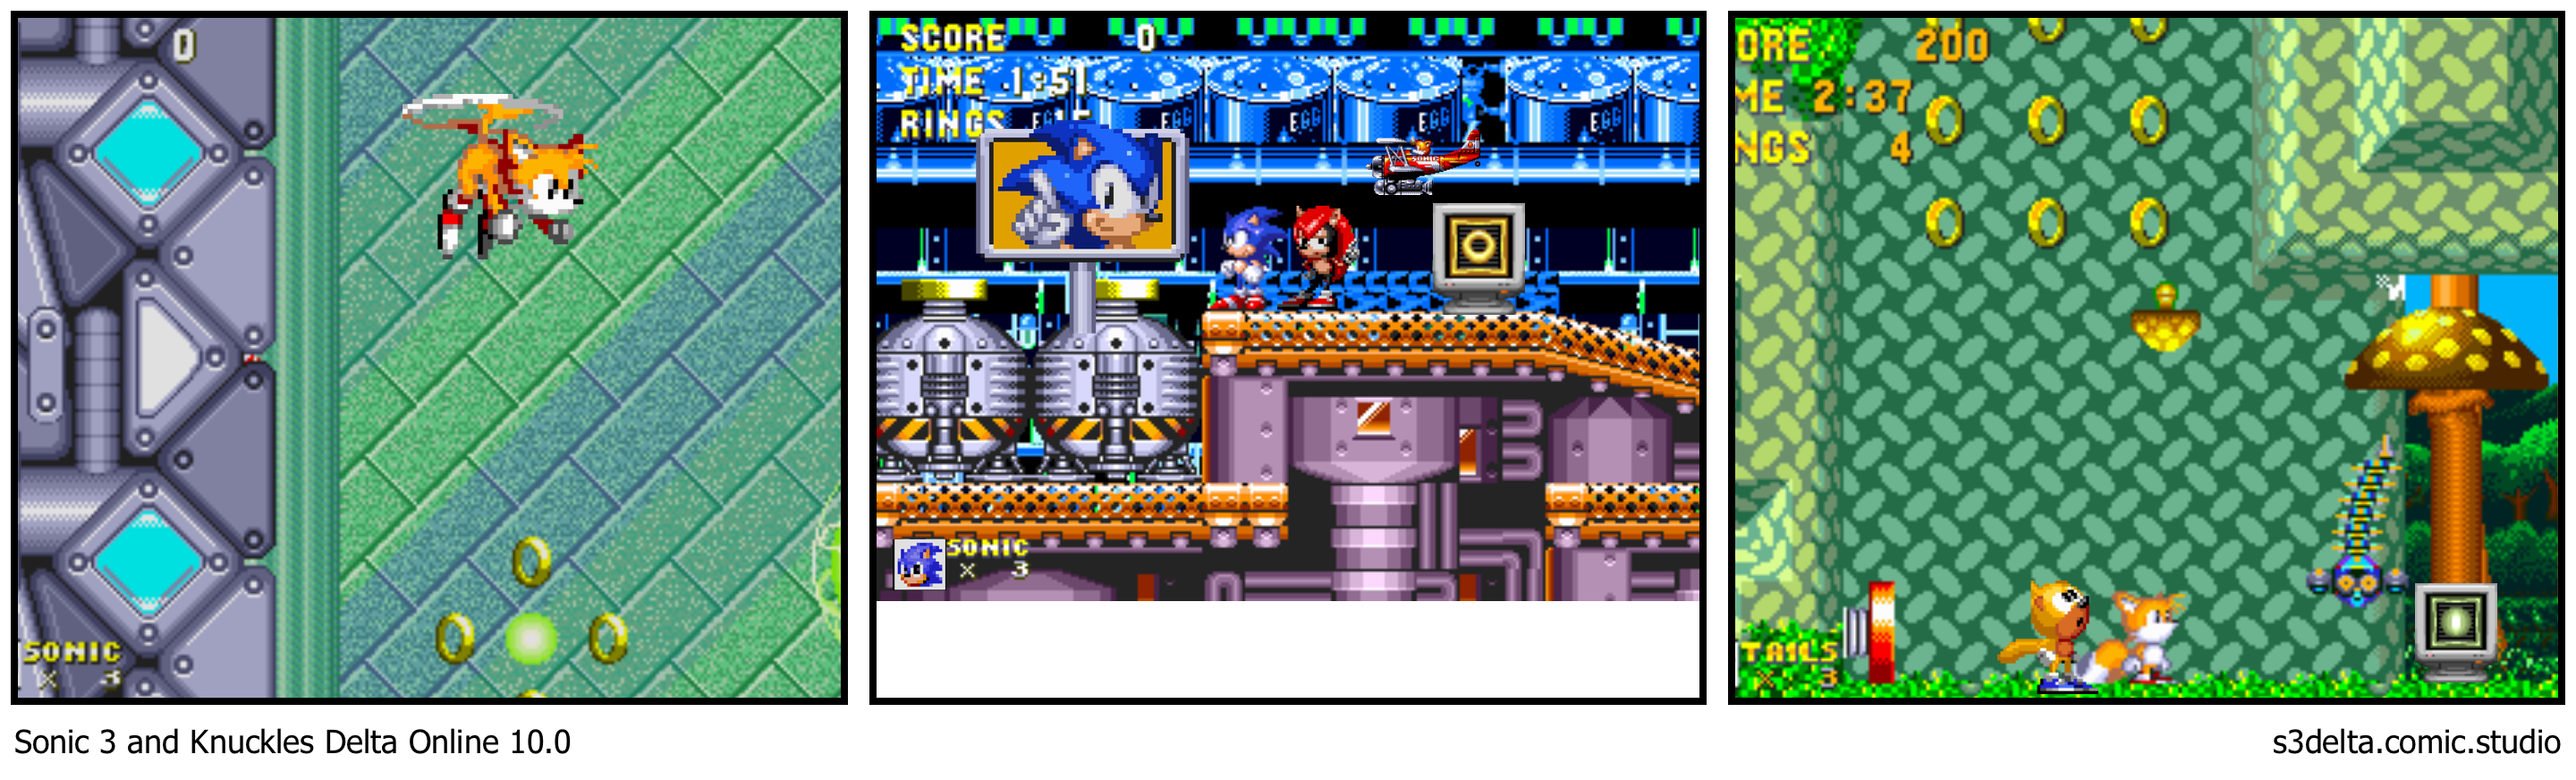 Sonic 3 and Knuckles Delta Online 10.0